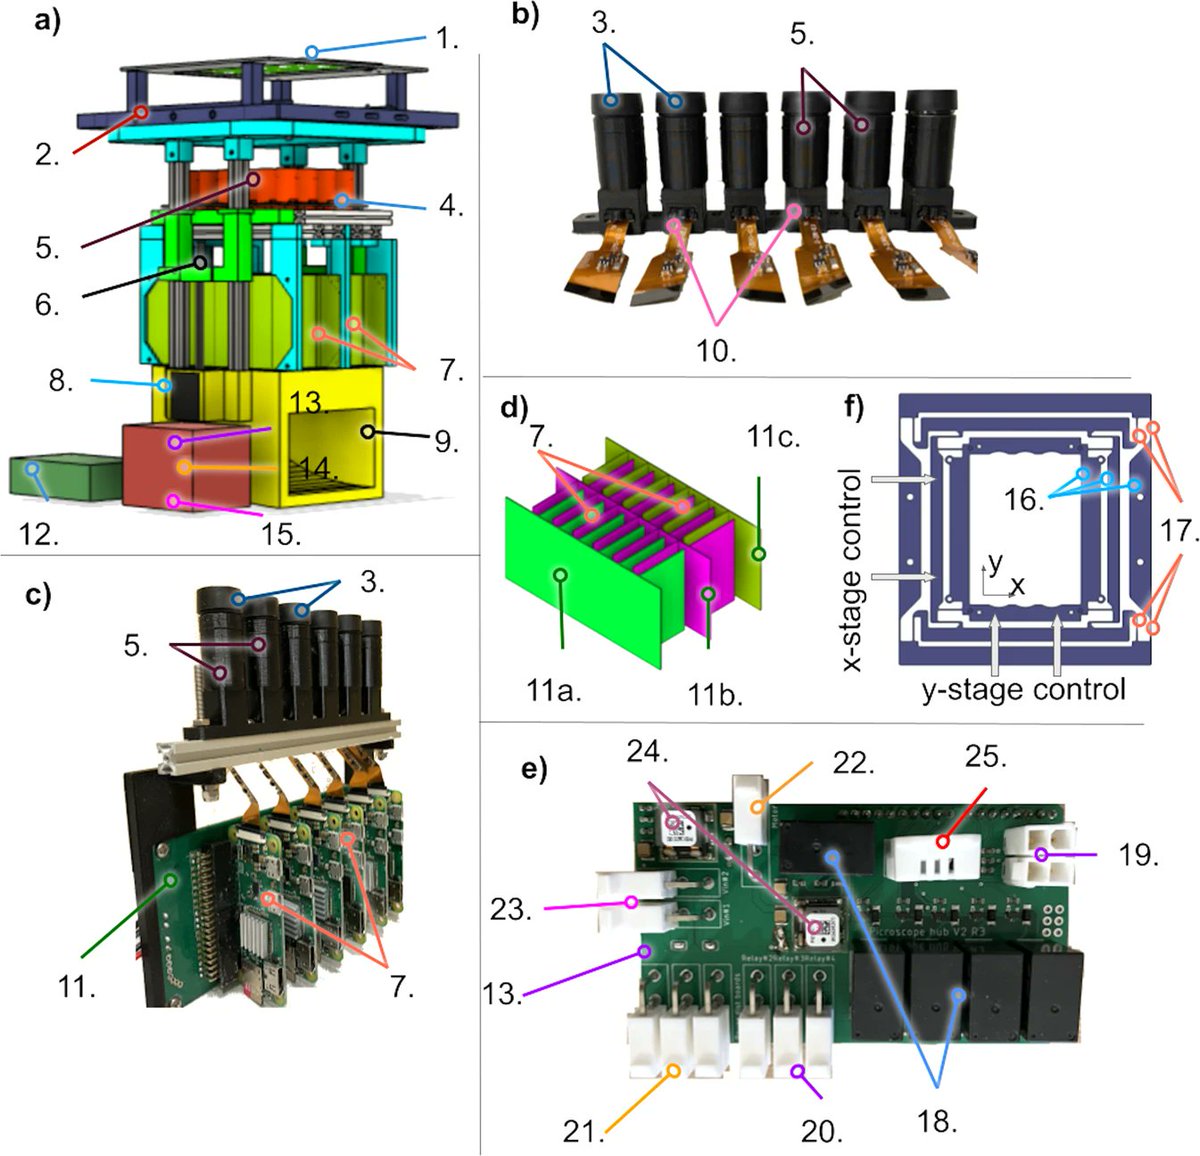 #Picroscope: A low-cost #OpenSource system for simultaneous longitudinal biological #imaging:

-#RaspberryPi/#Arduino-#automated
-off-the-shelf & #3Dprinted parts
-24-well compatible
-captures 3D z-stack image data

doi.org/10.1038/s42003…
#DIYbio #lab #instruments #microscopy